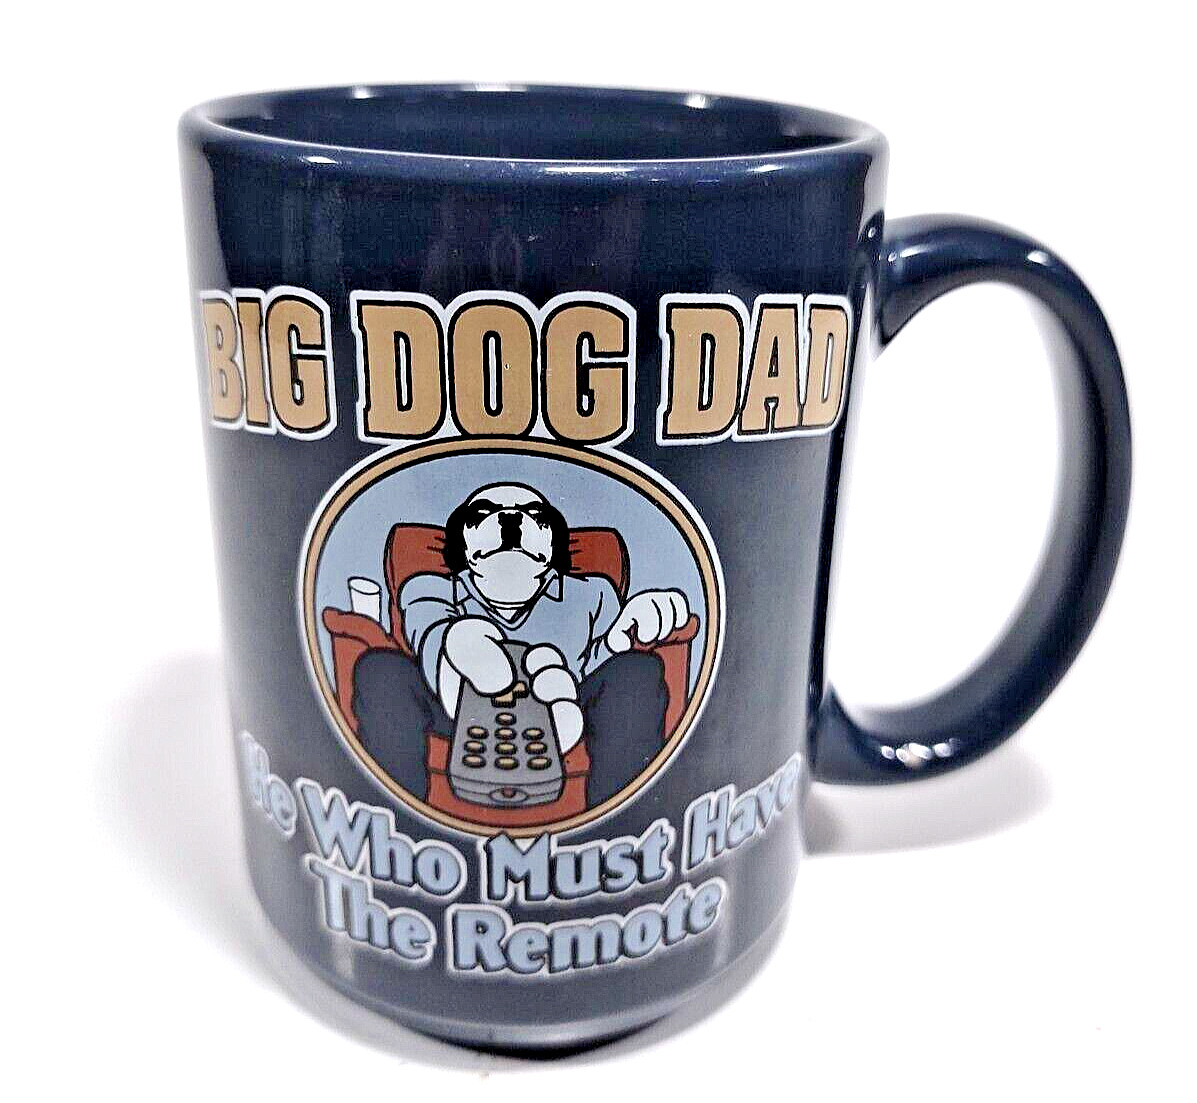 BIG DOG DAD Large Coffee Mug  HE WHO MUST HAVE THE REMOTE  Double Sided 2005